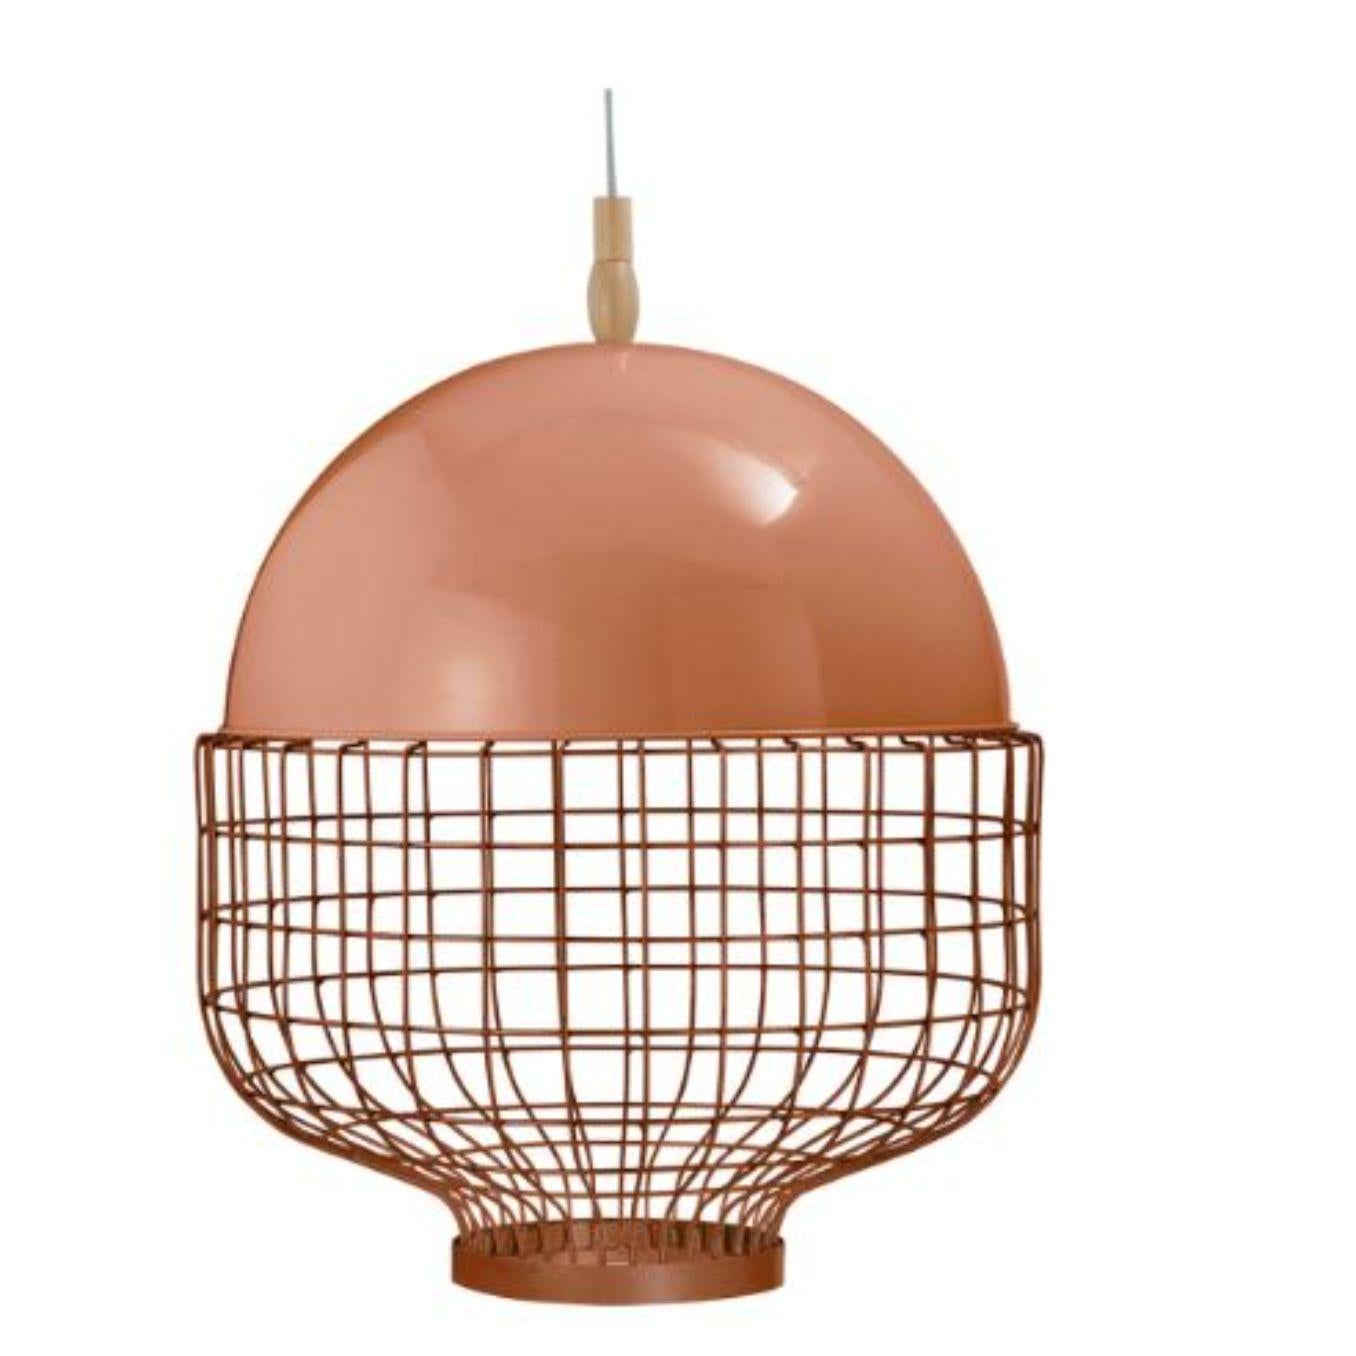 Salmon magnolia suspension lamp with copper ring by Dooq.
Dimensions: W 65 x D 65 x H 68 cm.
Materials: lacquered metal, polished or brushed metal, copper.
Also available in different colours and materials.

Information:
230V/50Hz
E27/1x20W